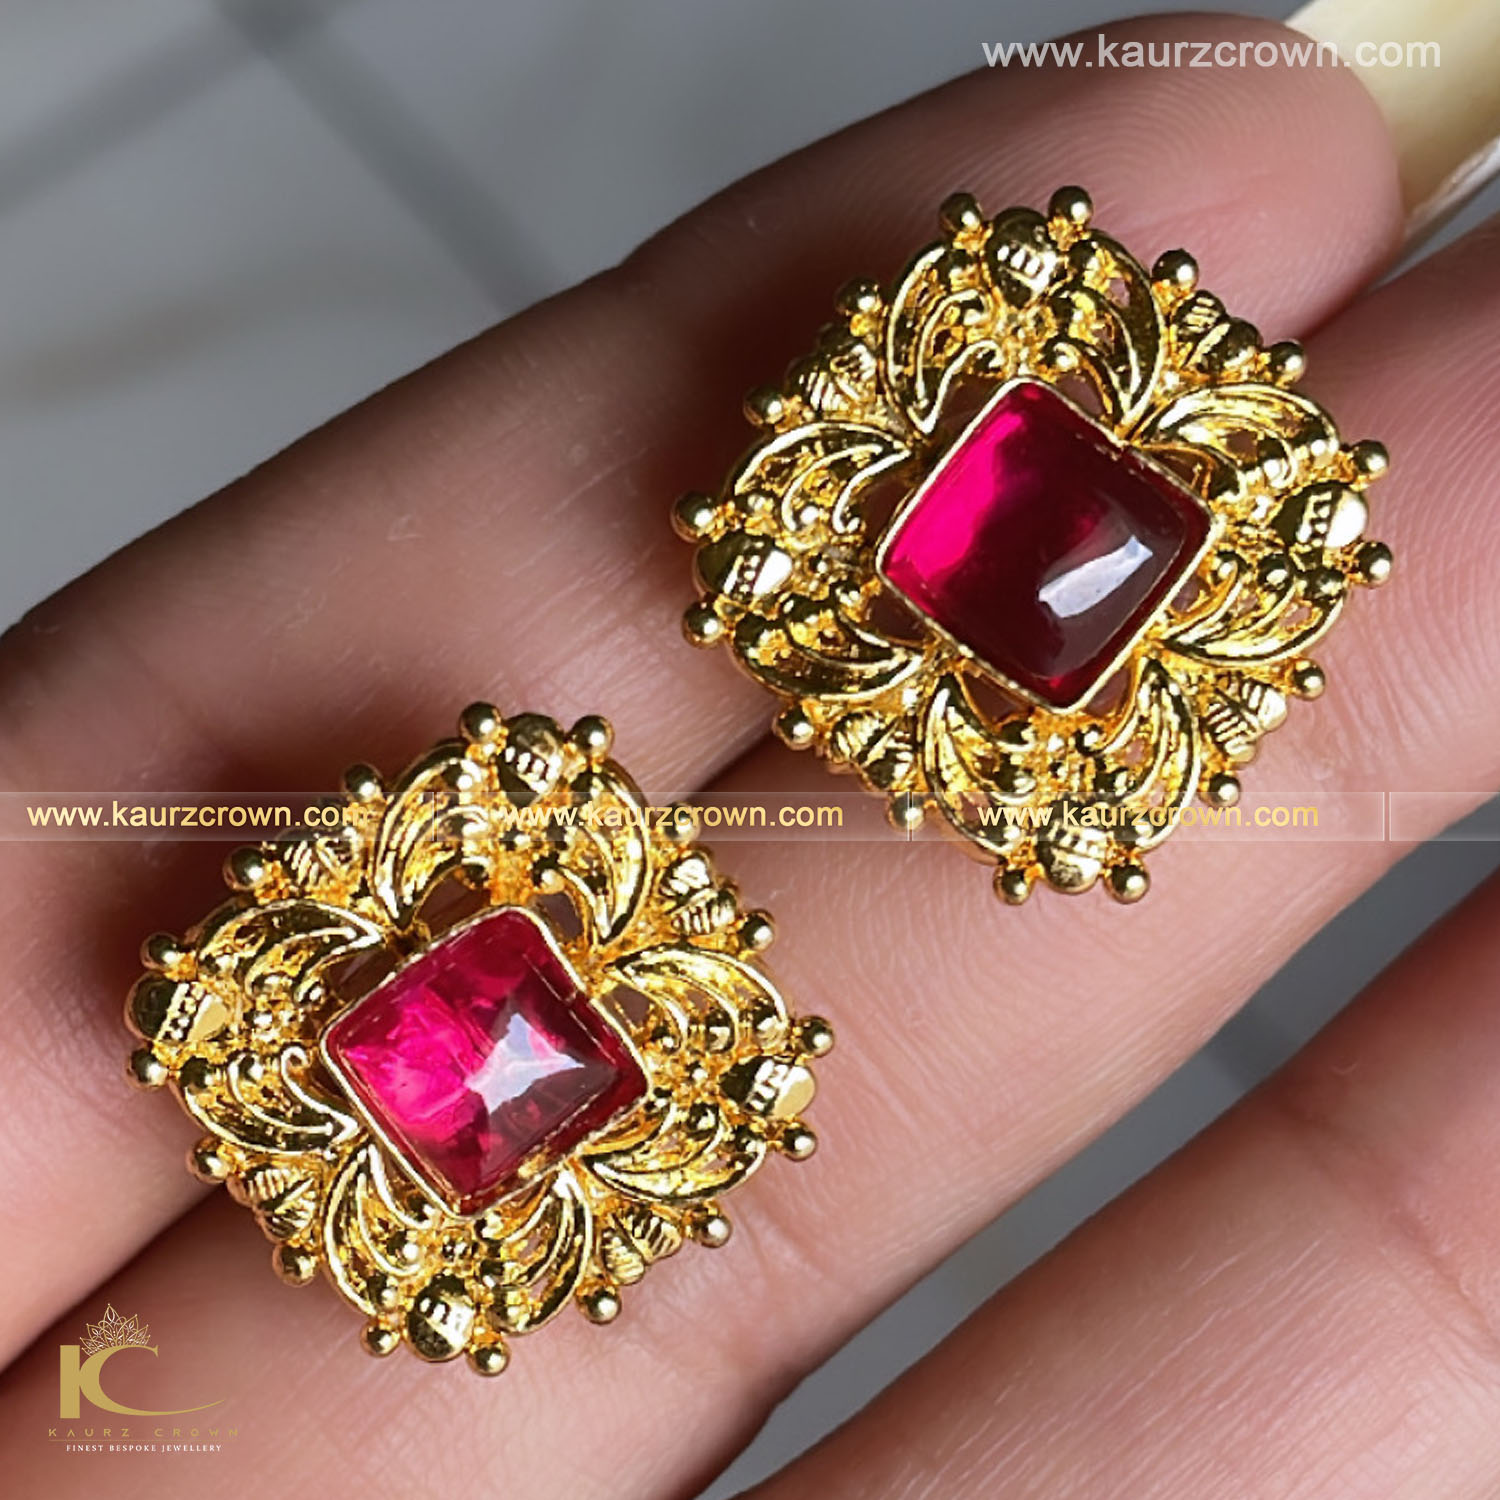 Buy quality Traditional 22kt Gold Studs in Pune